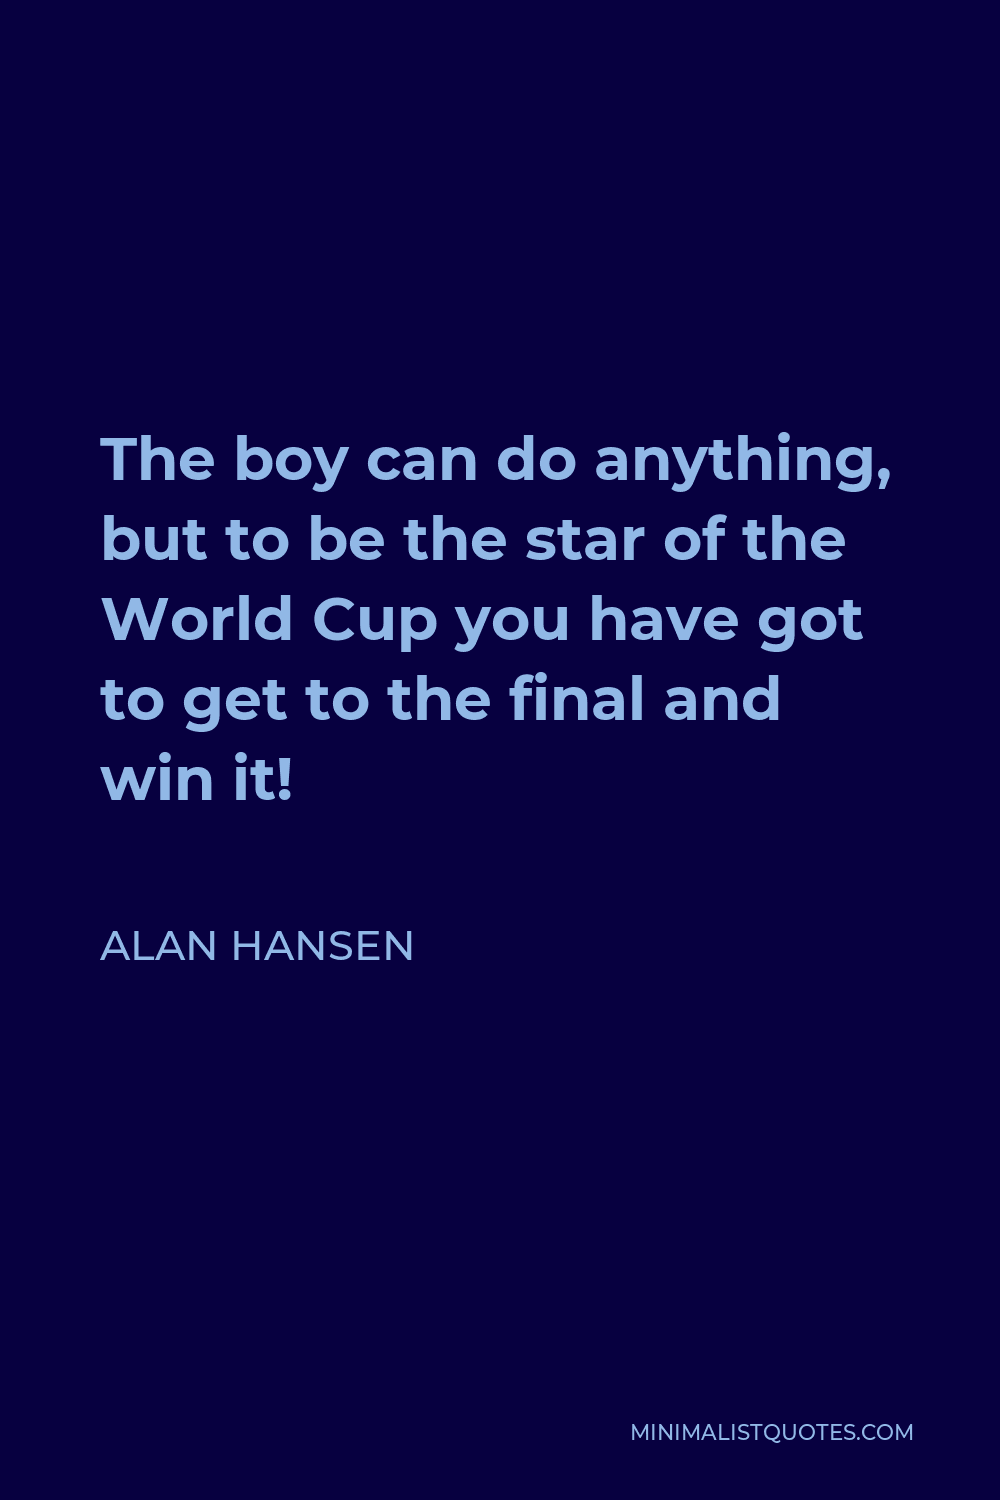 Alan Hansen Quote - The boy can do anything, but to be the star of the World Cup you have got to get to the final and win it!